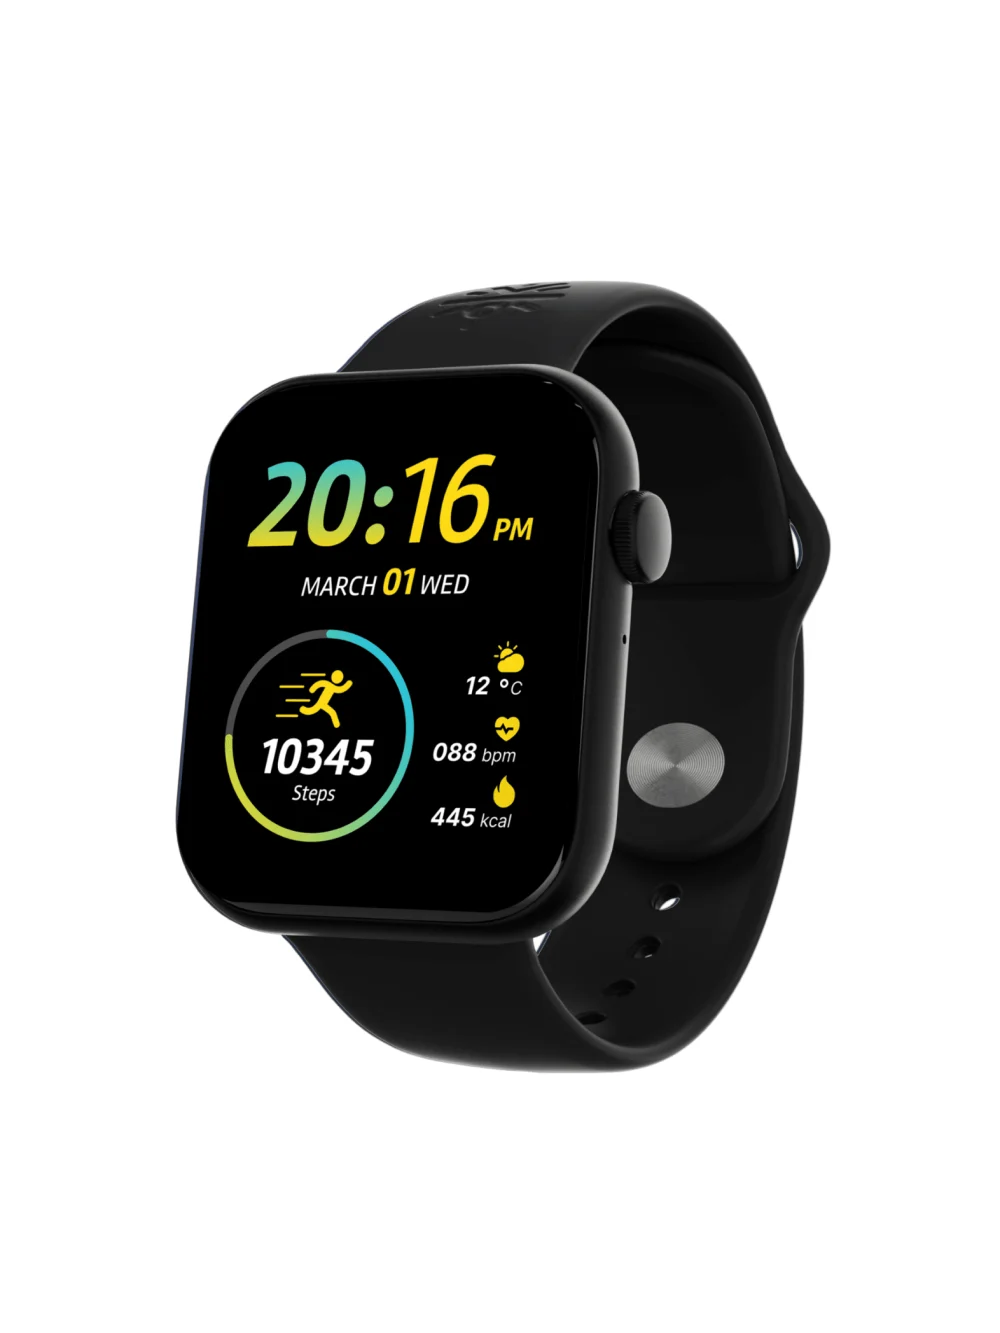 Cult.sport Launches Active T Smartwatch at Rs.1599